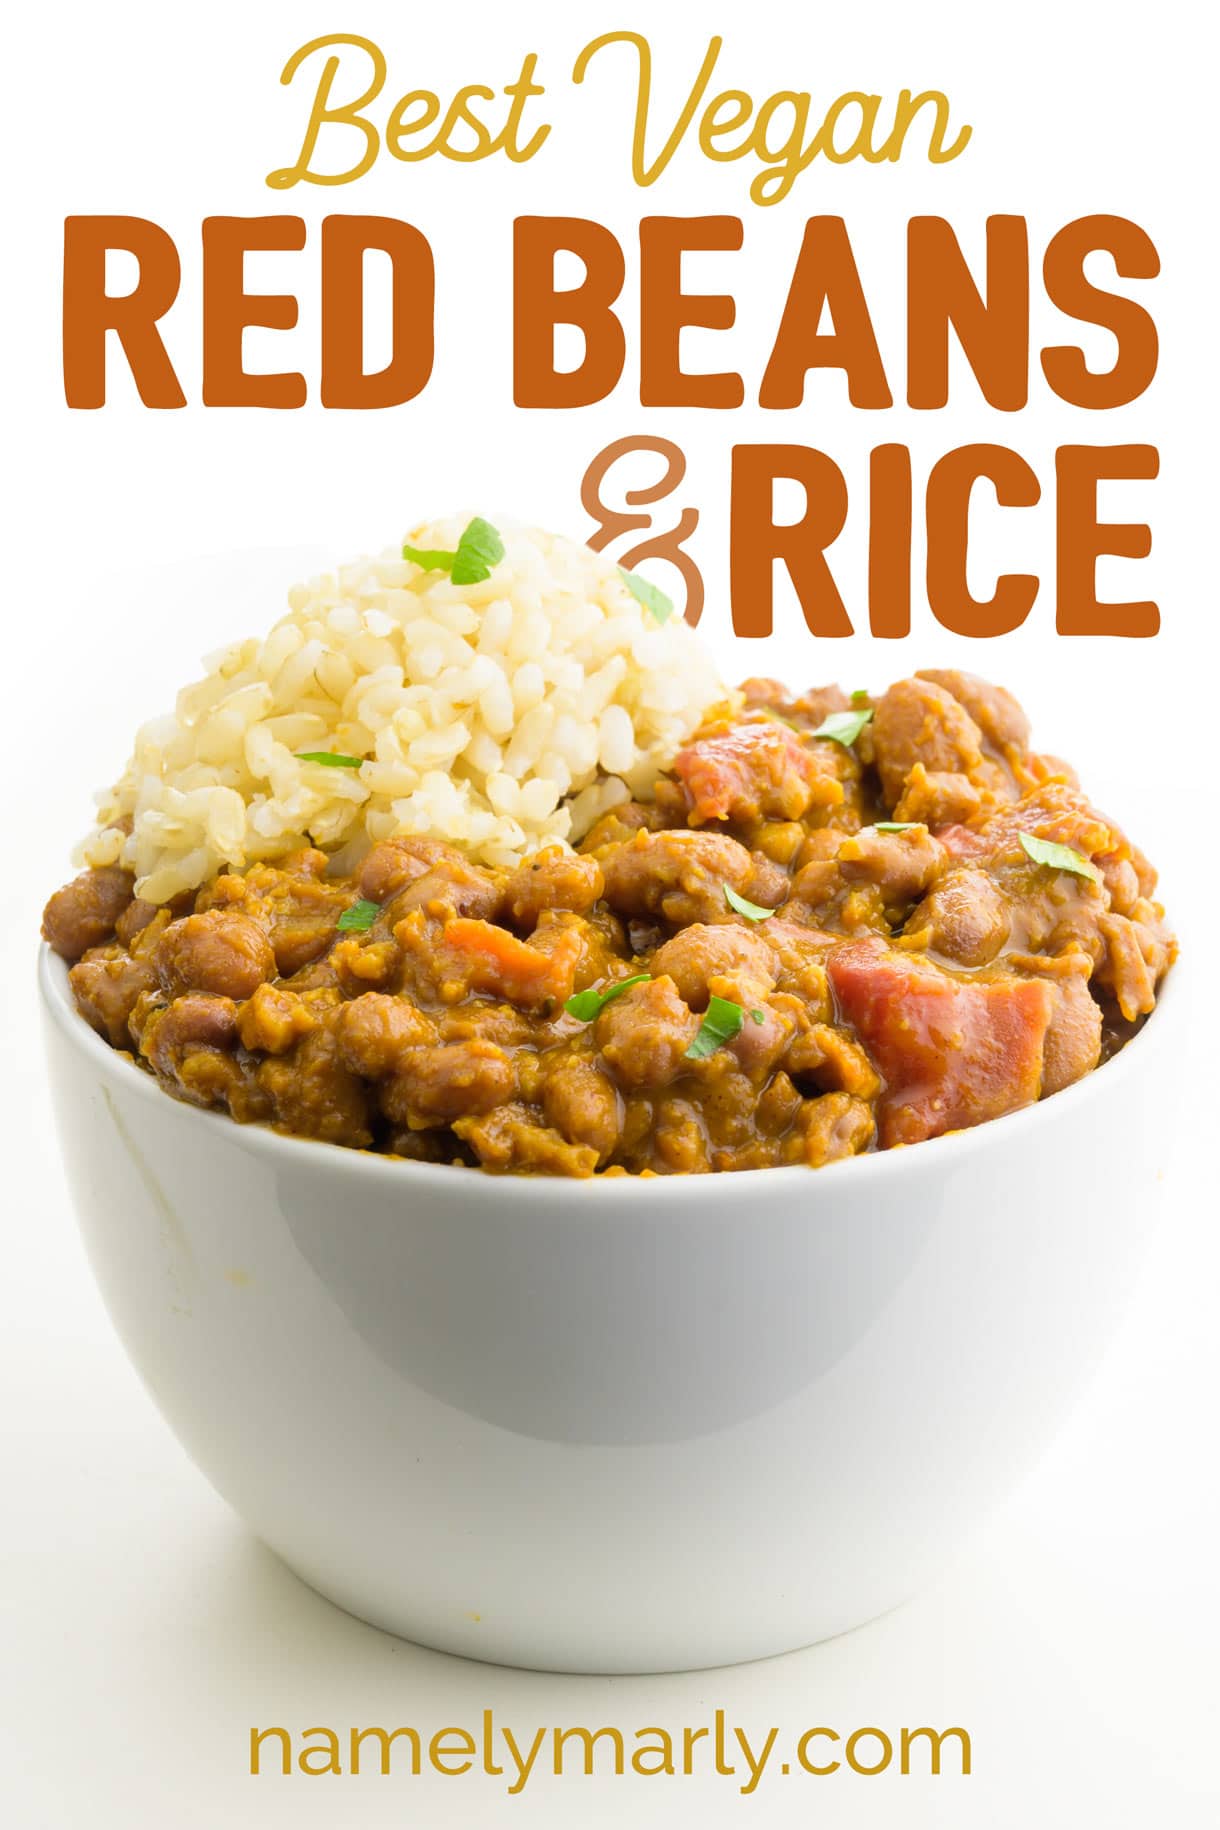 A bowl of beans with rice on the top. The text above it reads: Best Vegan Red Beans and Rice.